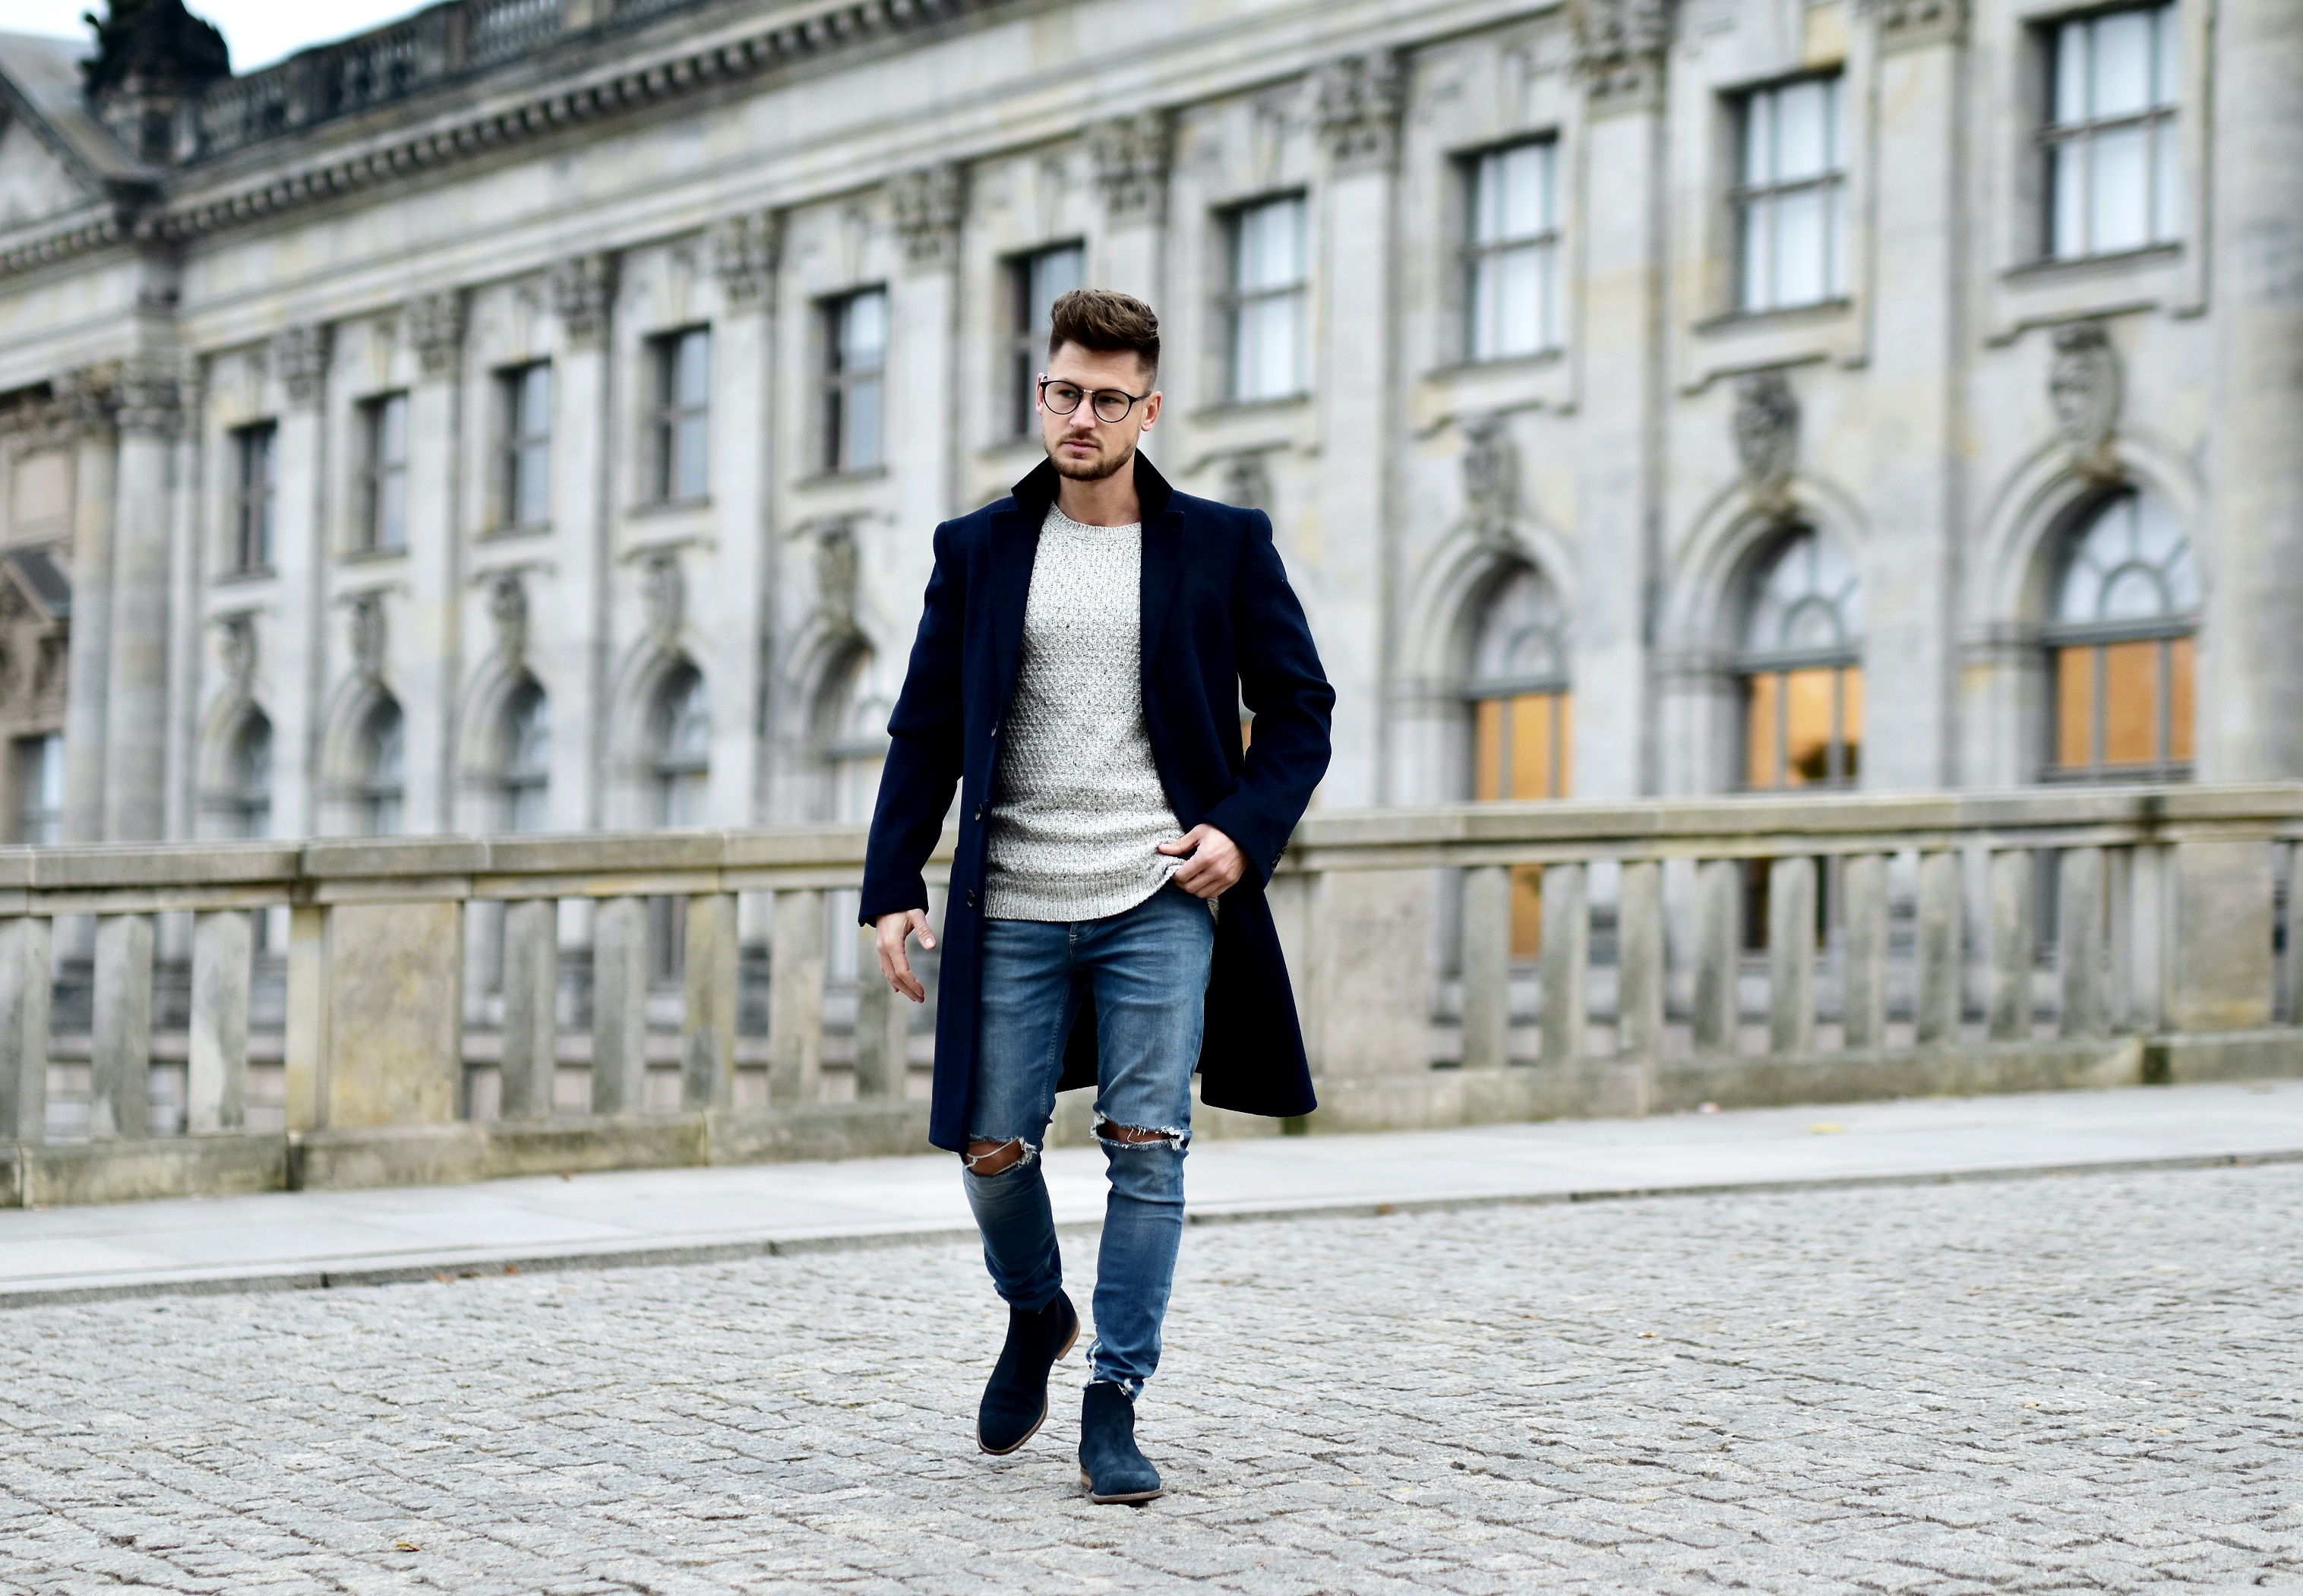 tommeezjerry-styleblog-maennerblog-maenner-modeblog-berlin-berlinblog-maennermodeblog-outfit-mantel-marks-and-spencer-coat-chelsea-boots-autumn-look-1